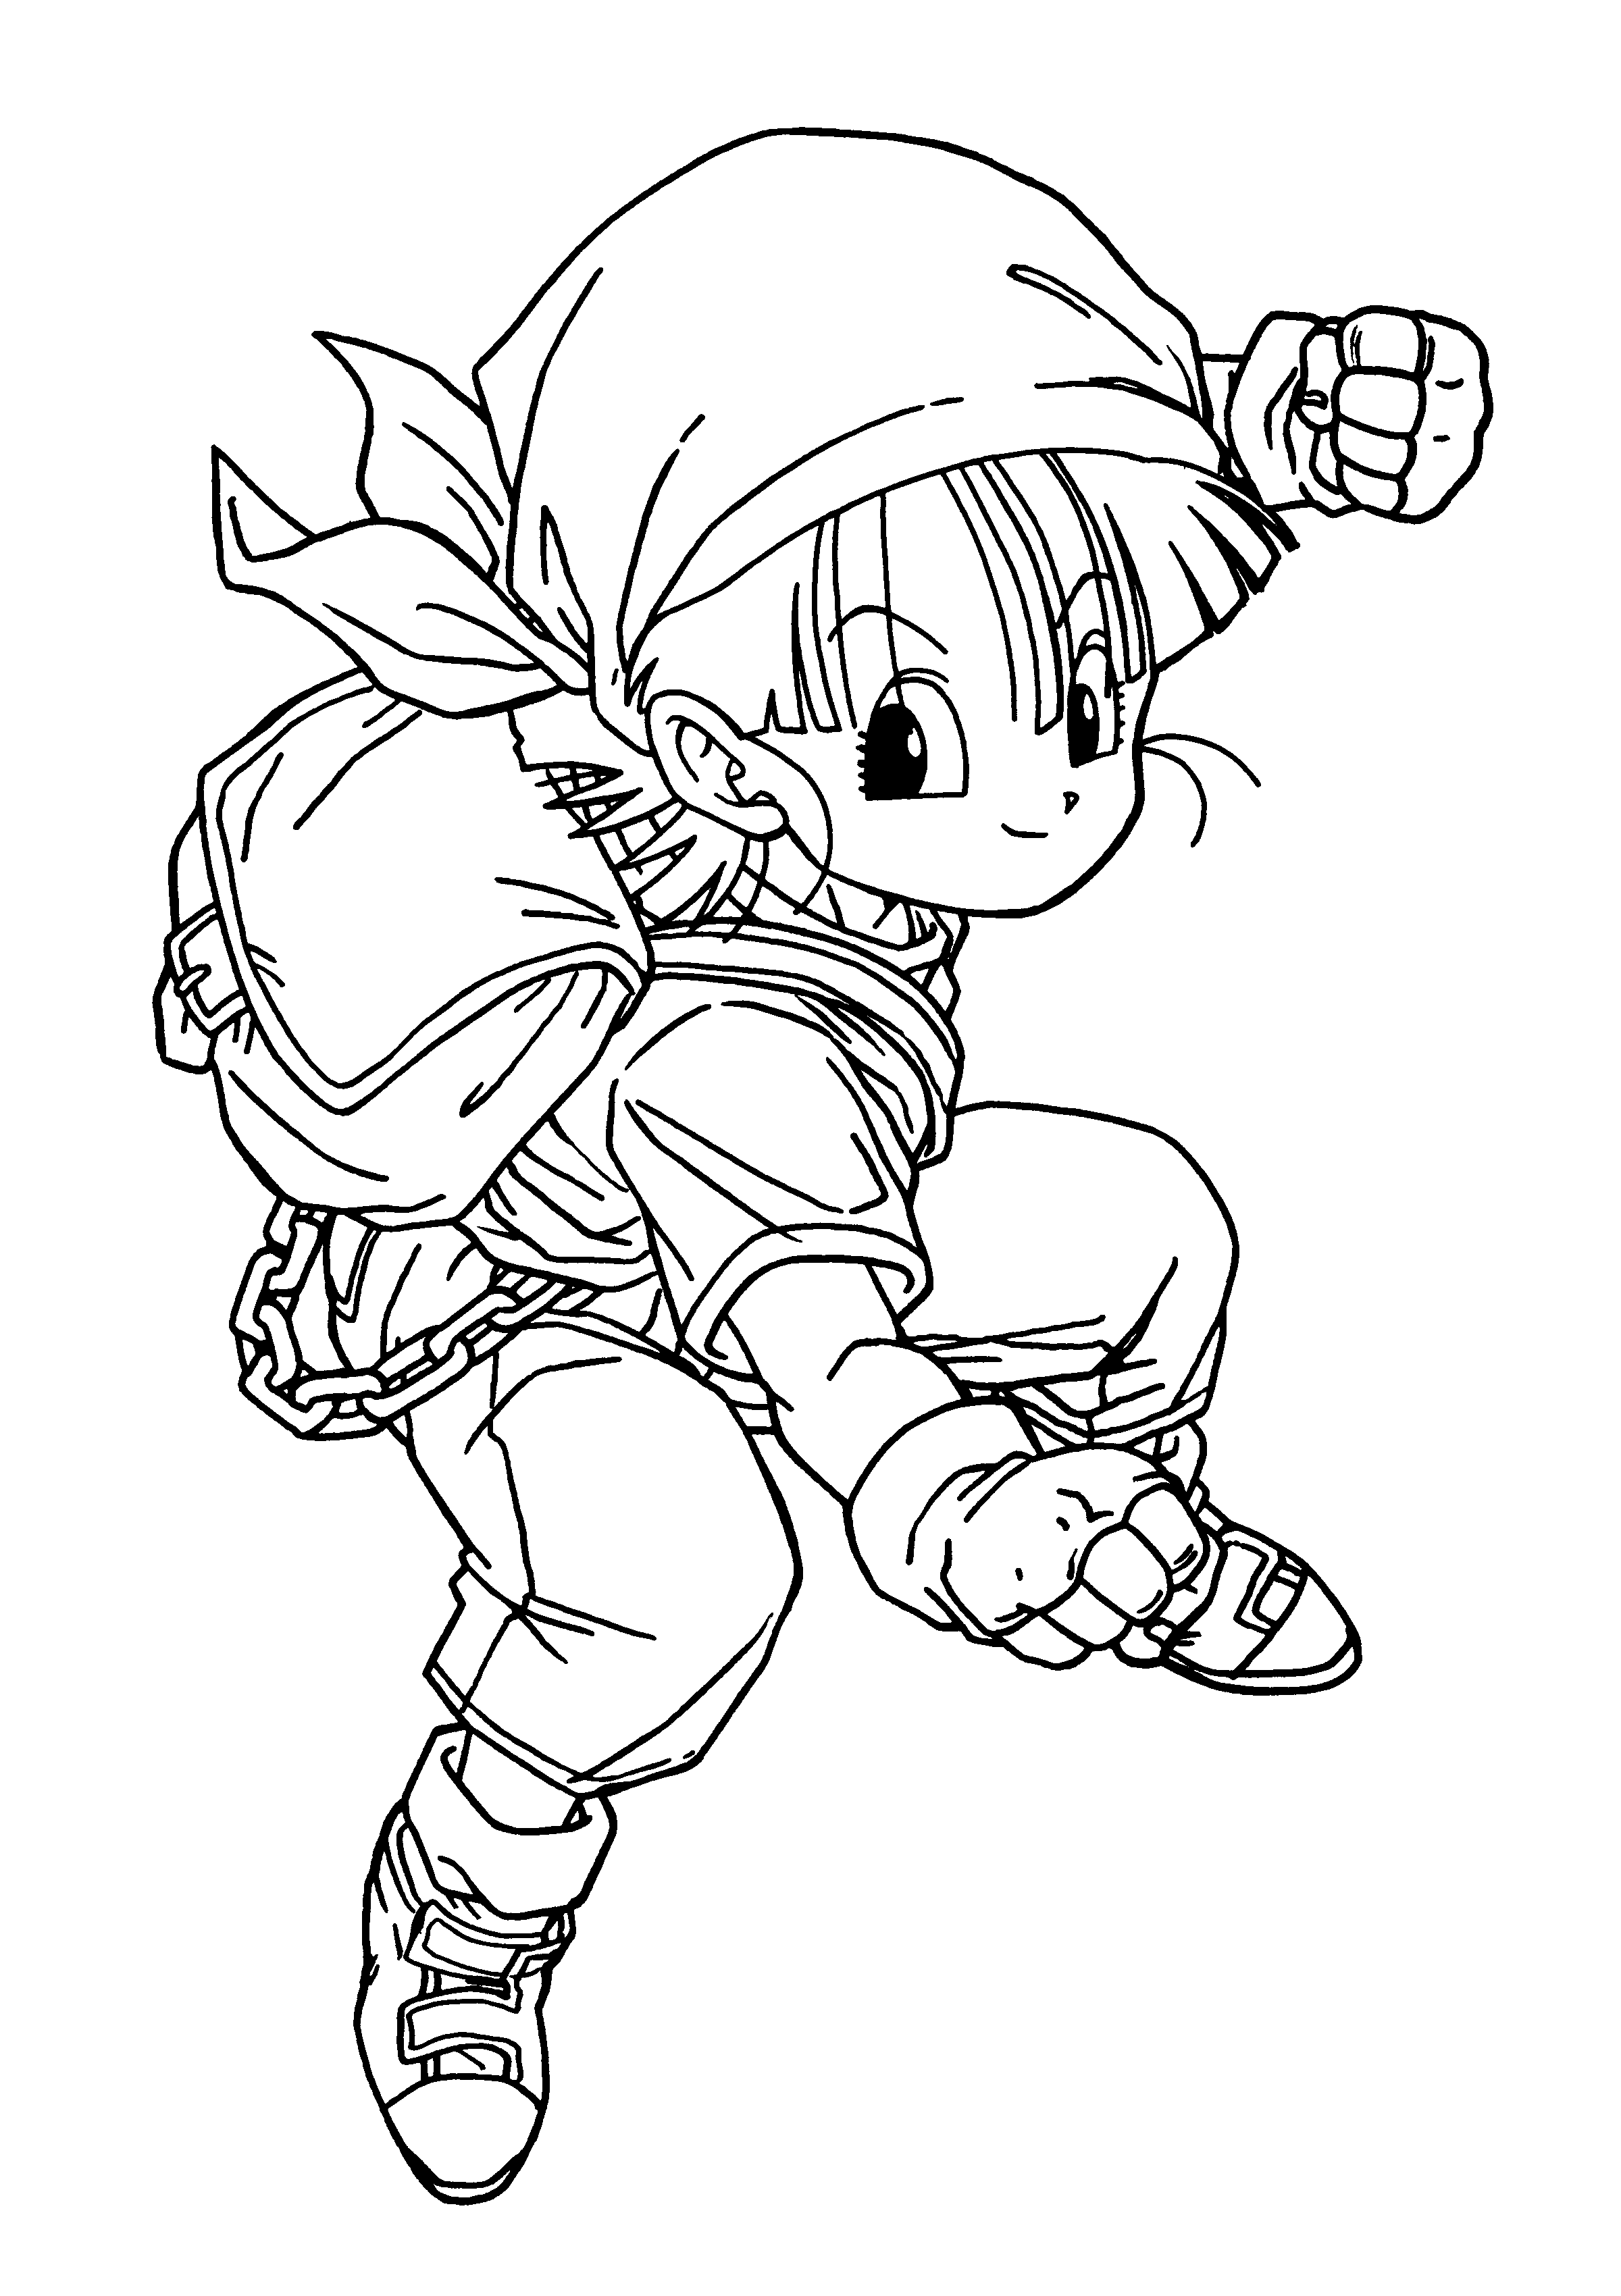 Coloring Page - Dragon ball z coloring pages 19